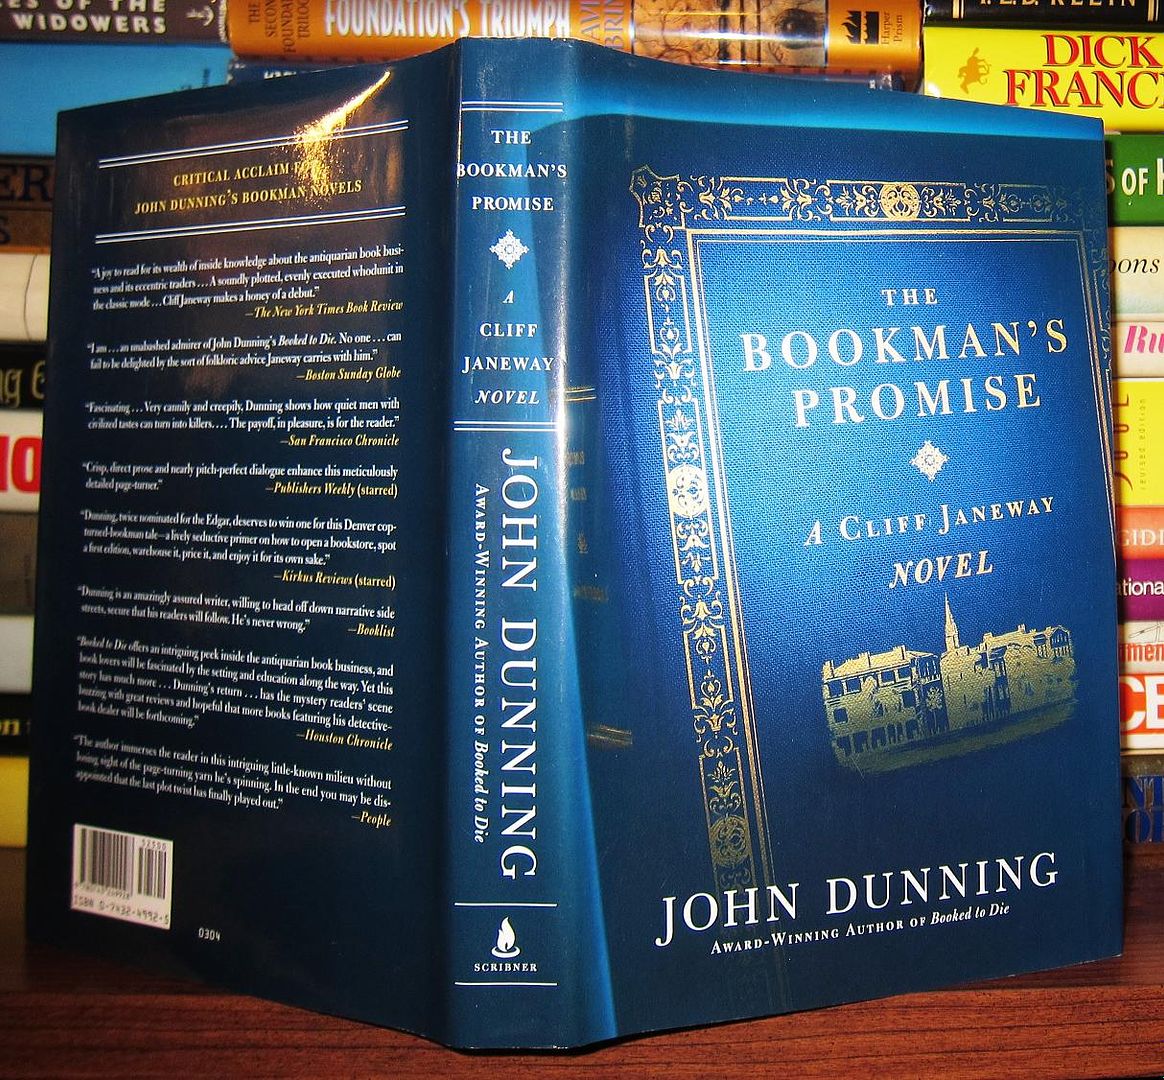 DUNNING, JOHN - The Bookman's Promise a Cliff Janeway Novel